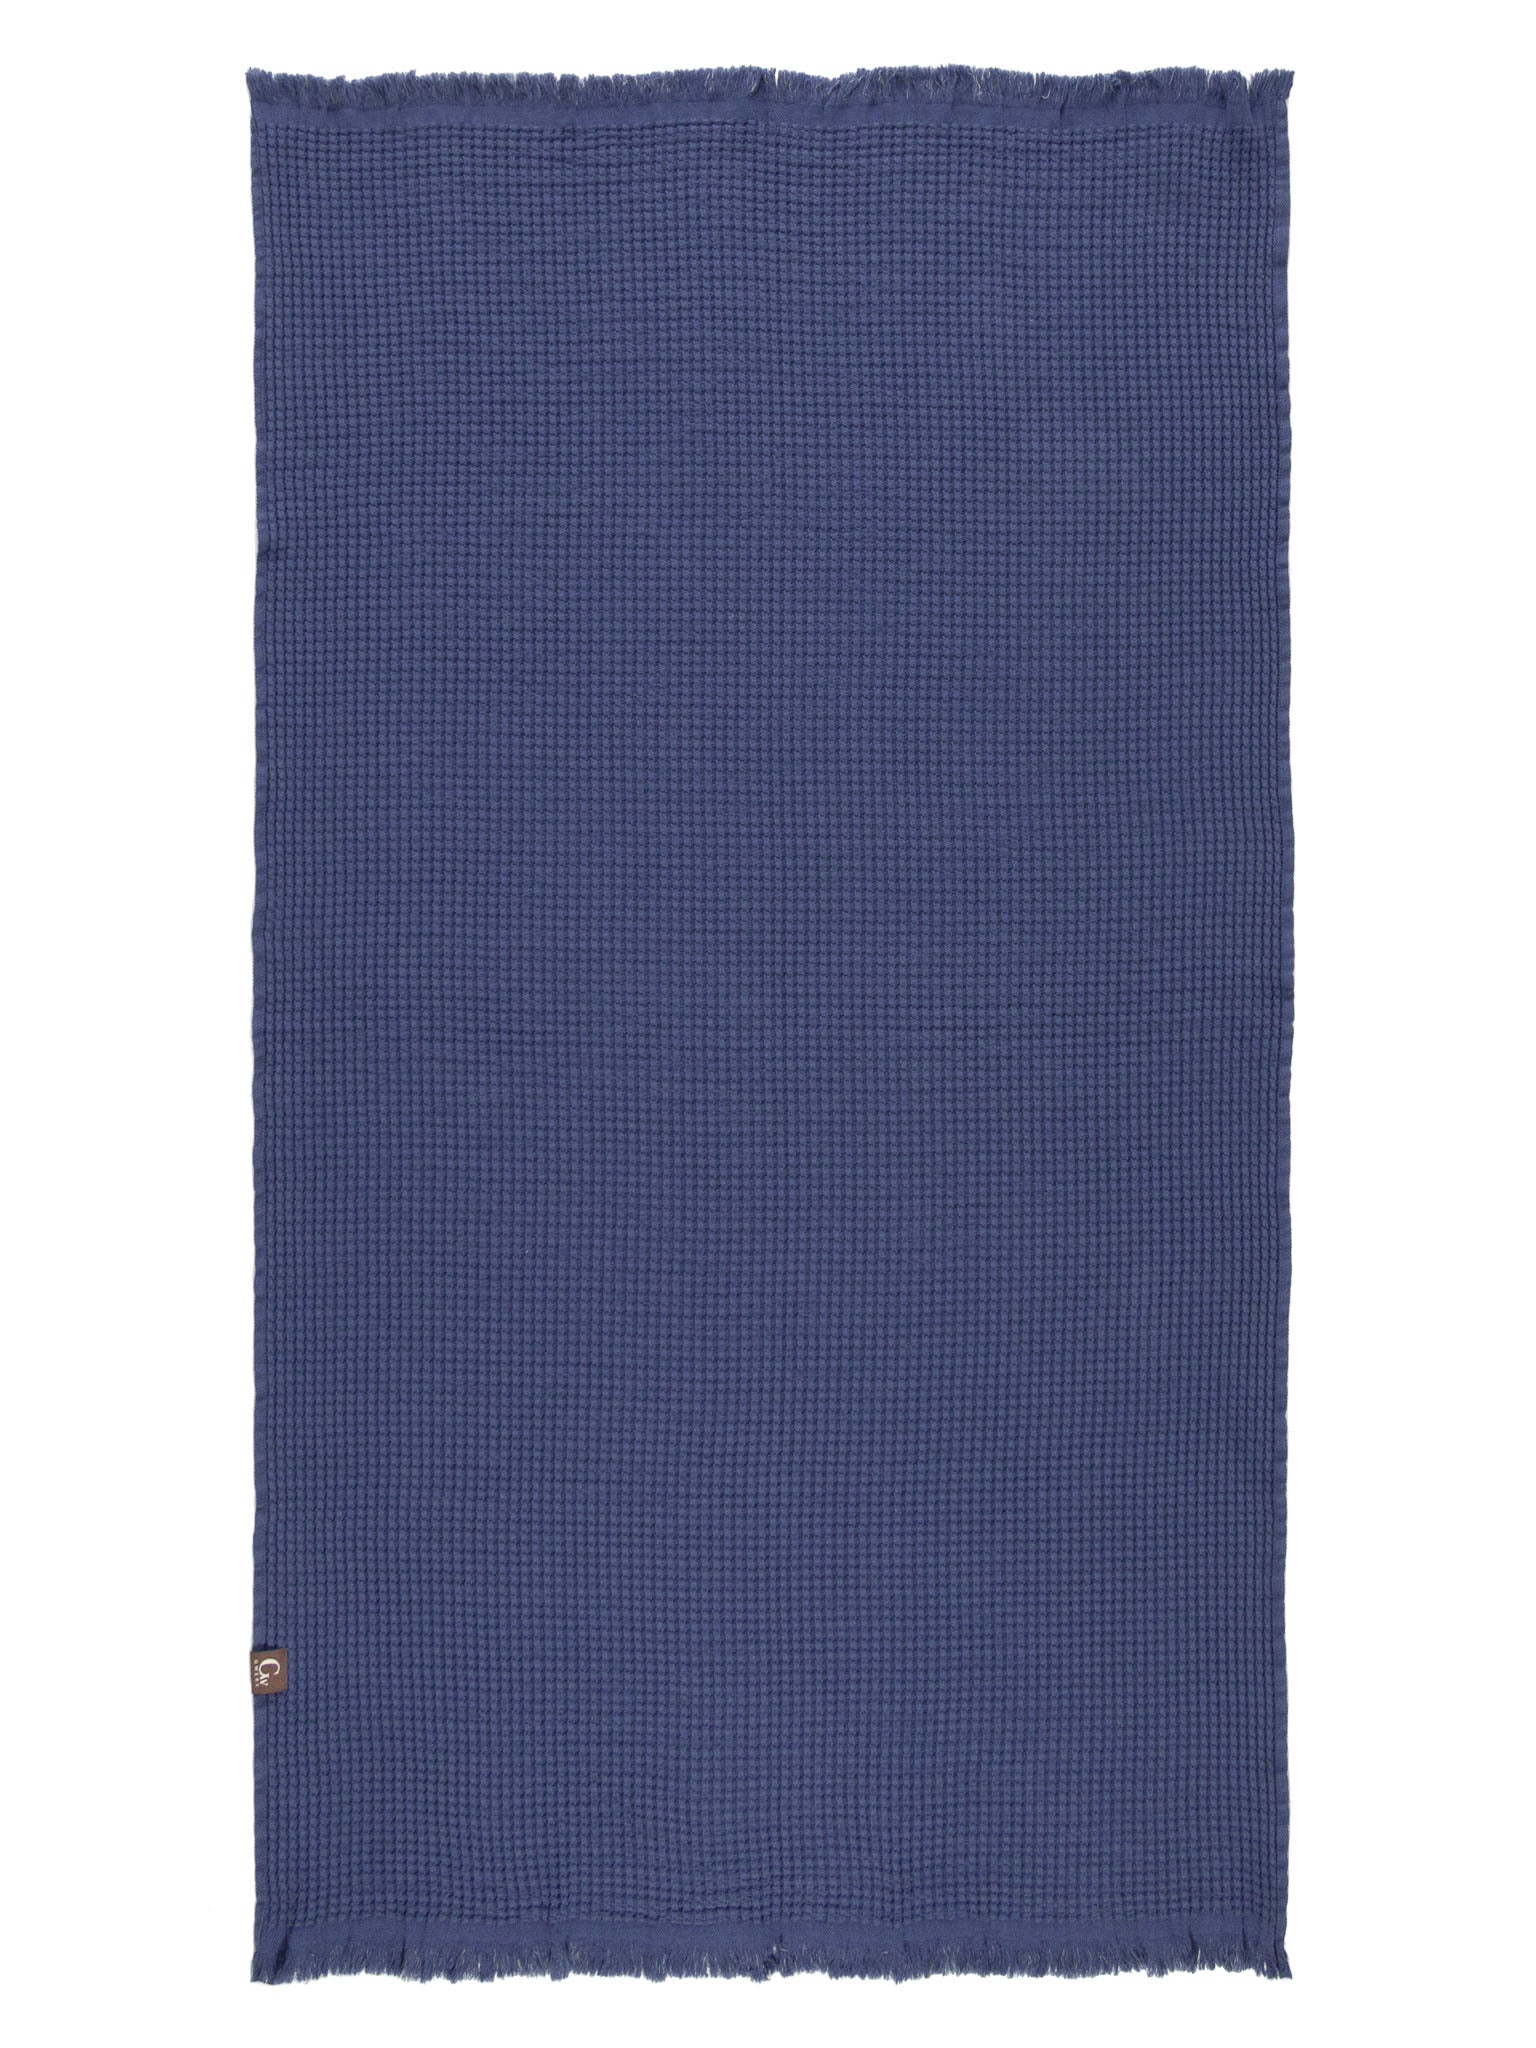 Blue double sided, honeycomb beach towel open up